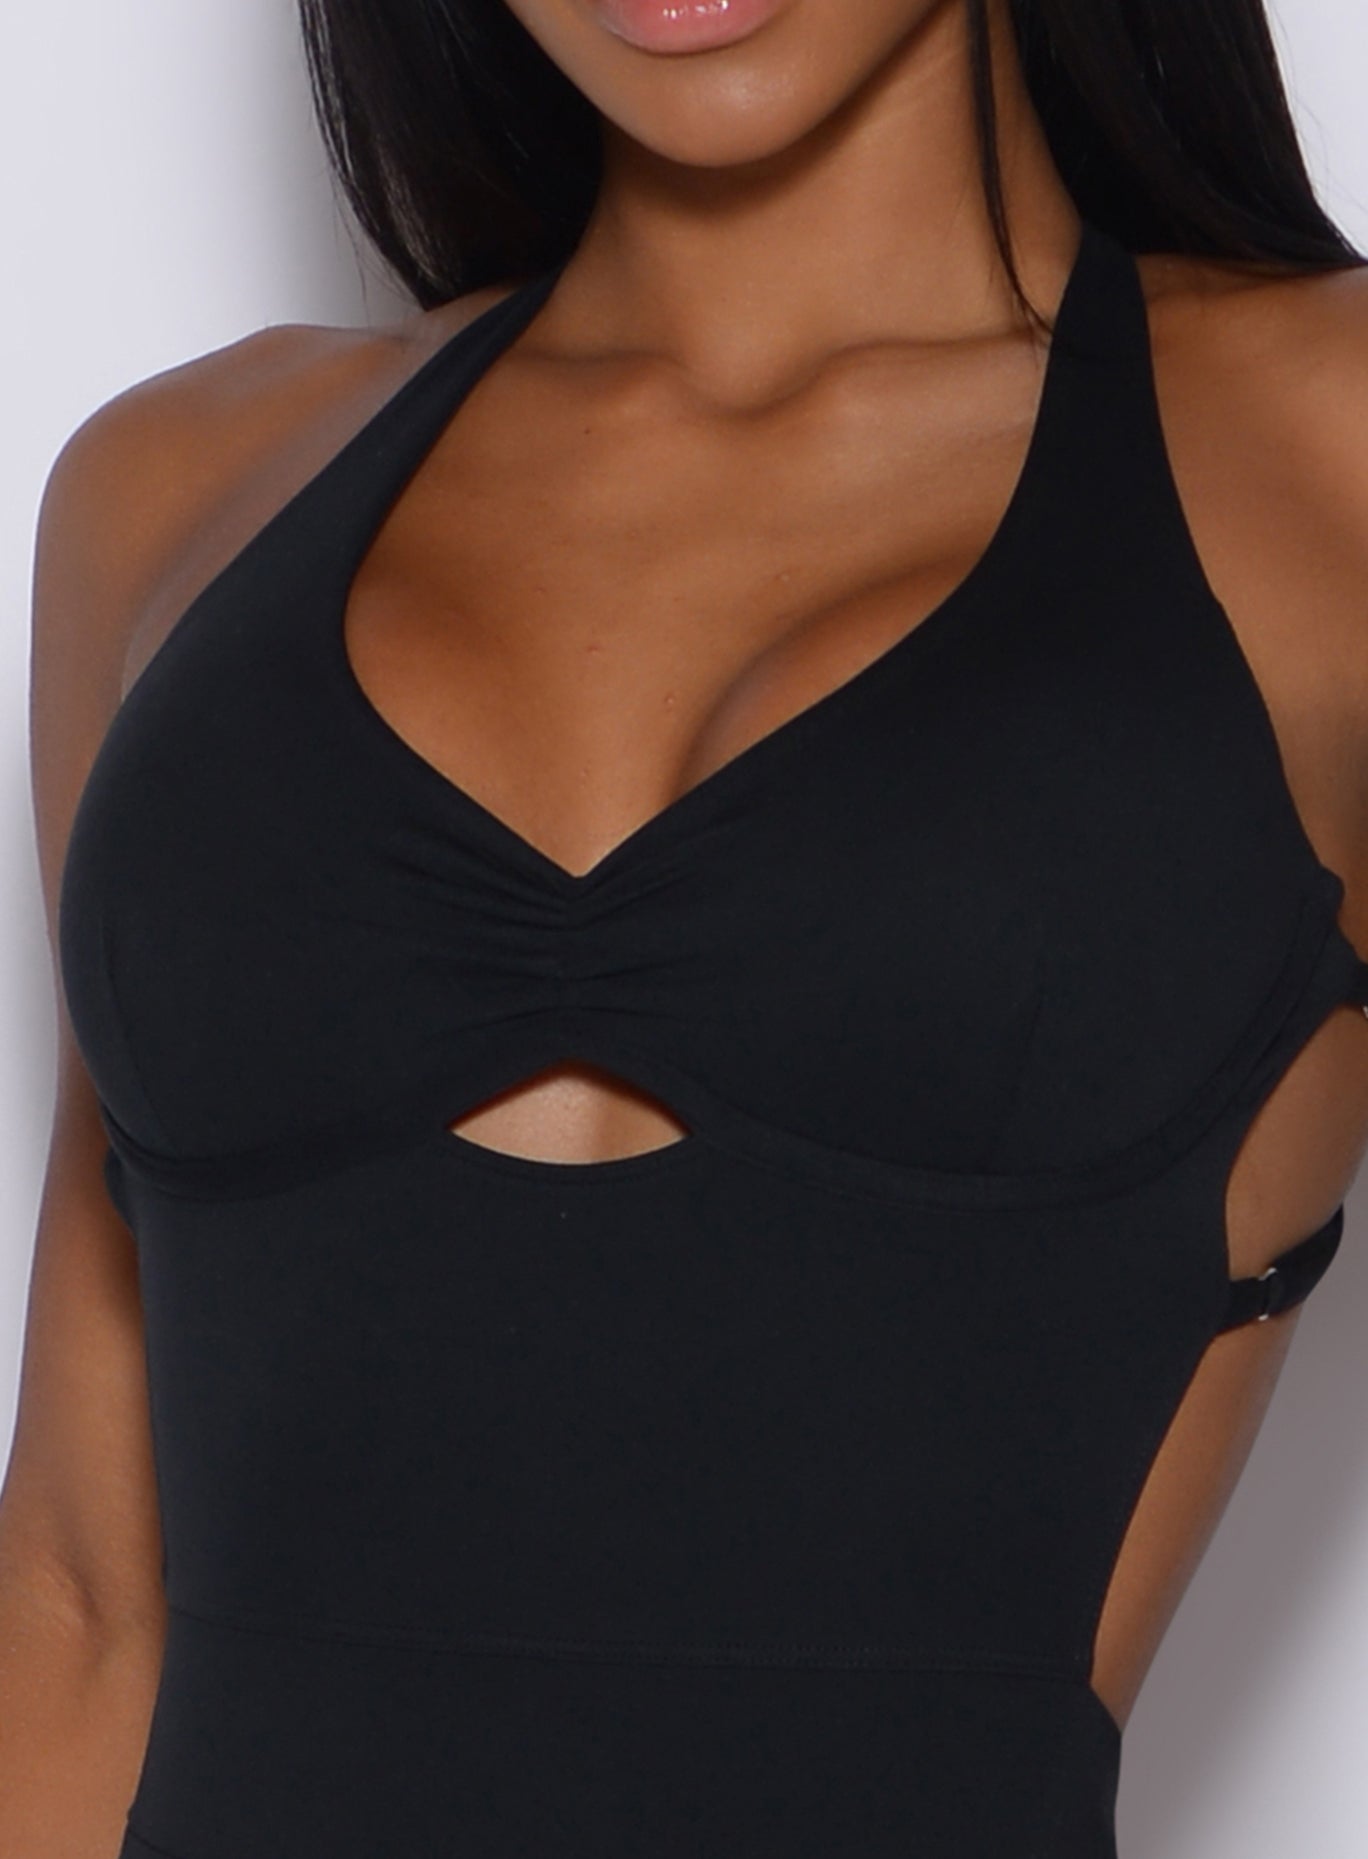 Picture of a model showing her cleavage and wearing a black bodysuit 